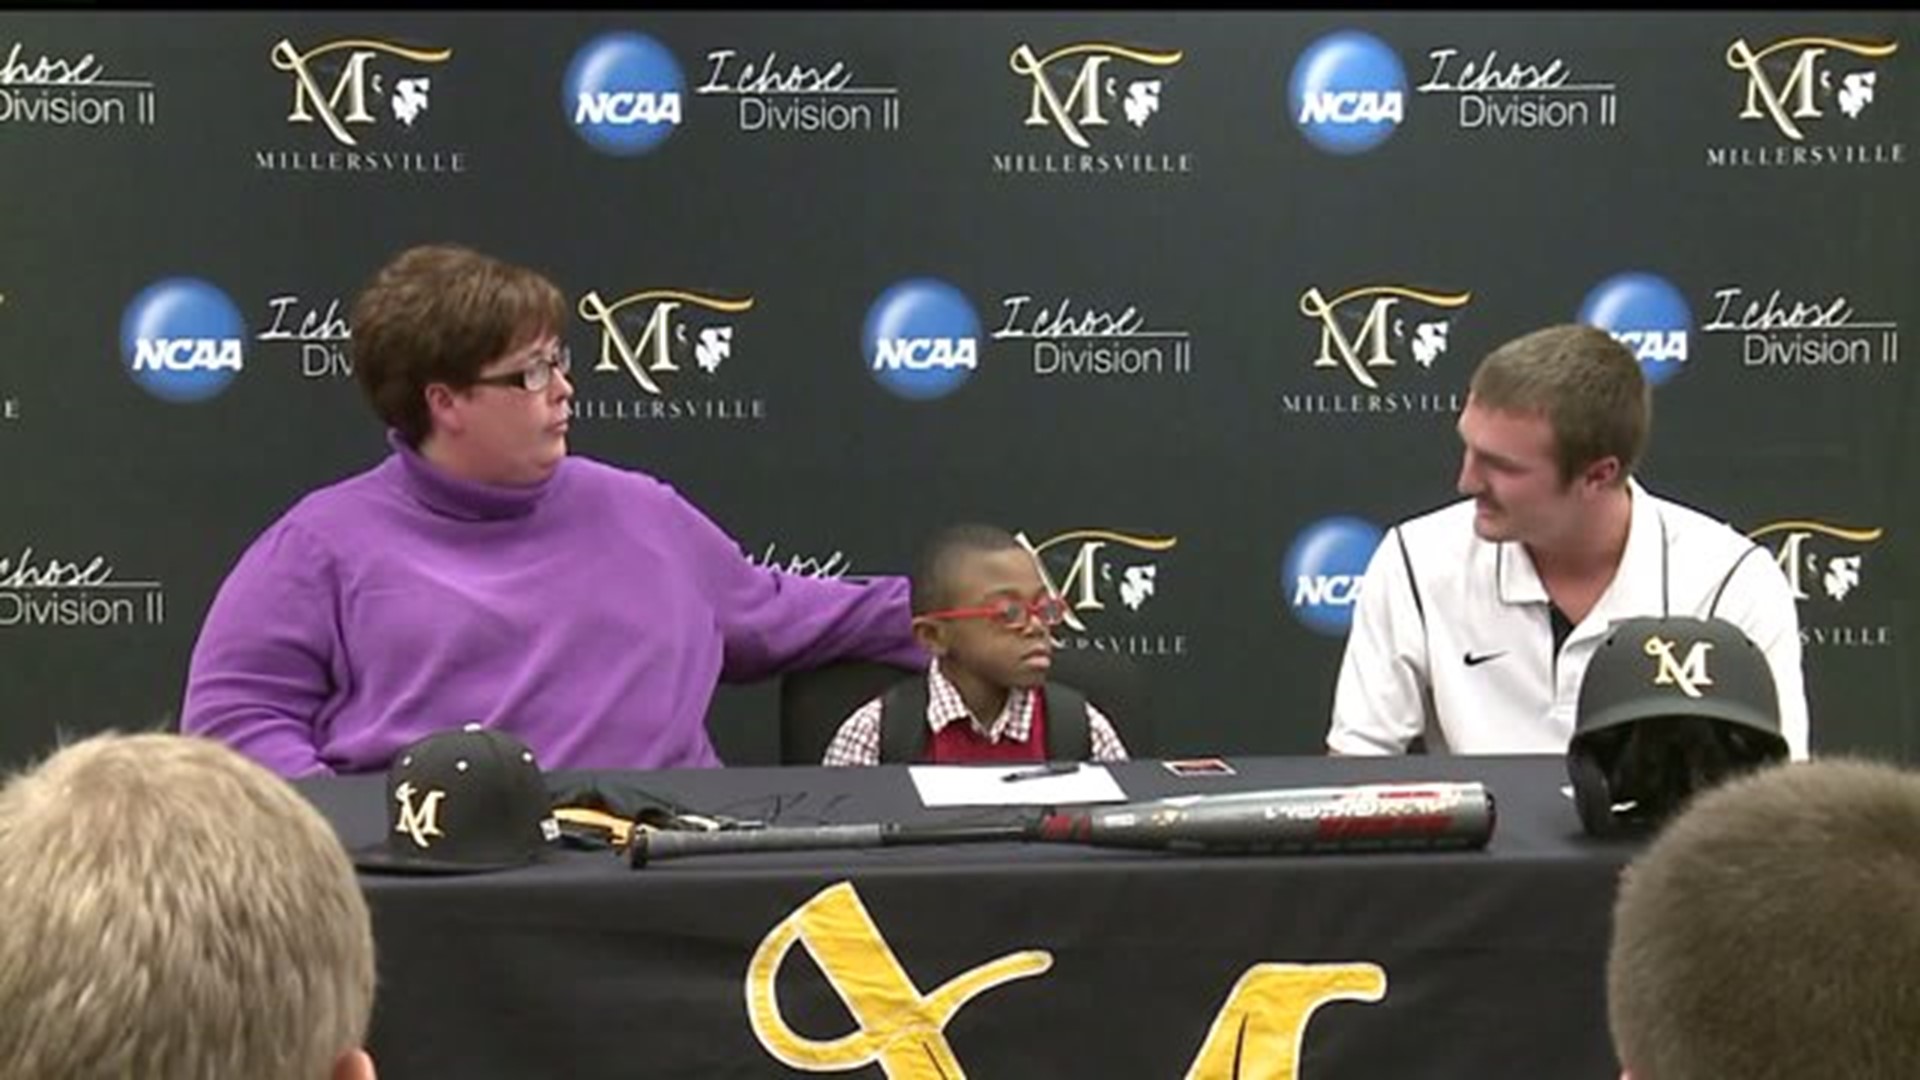 Millersville Baseball Team Signs Honorary Player